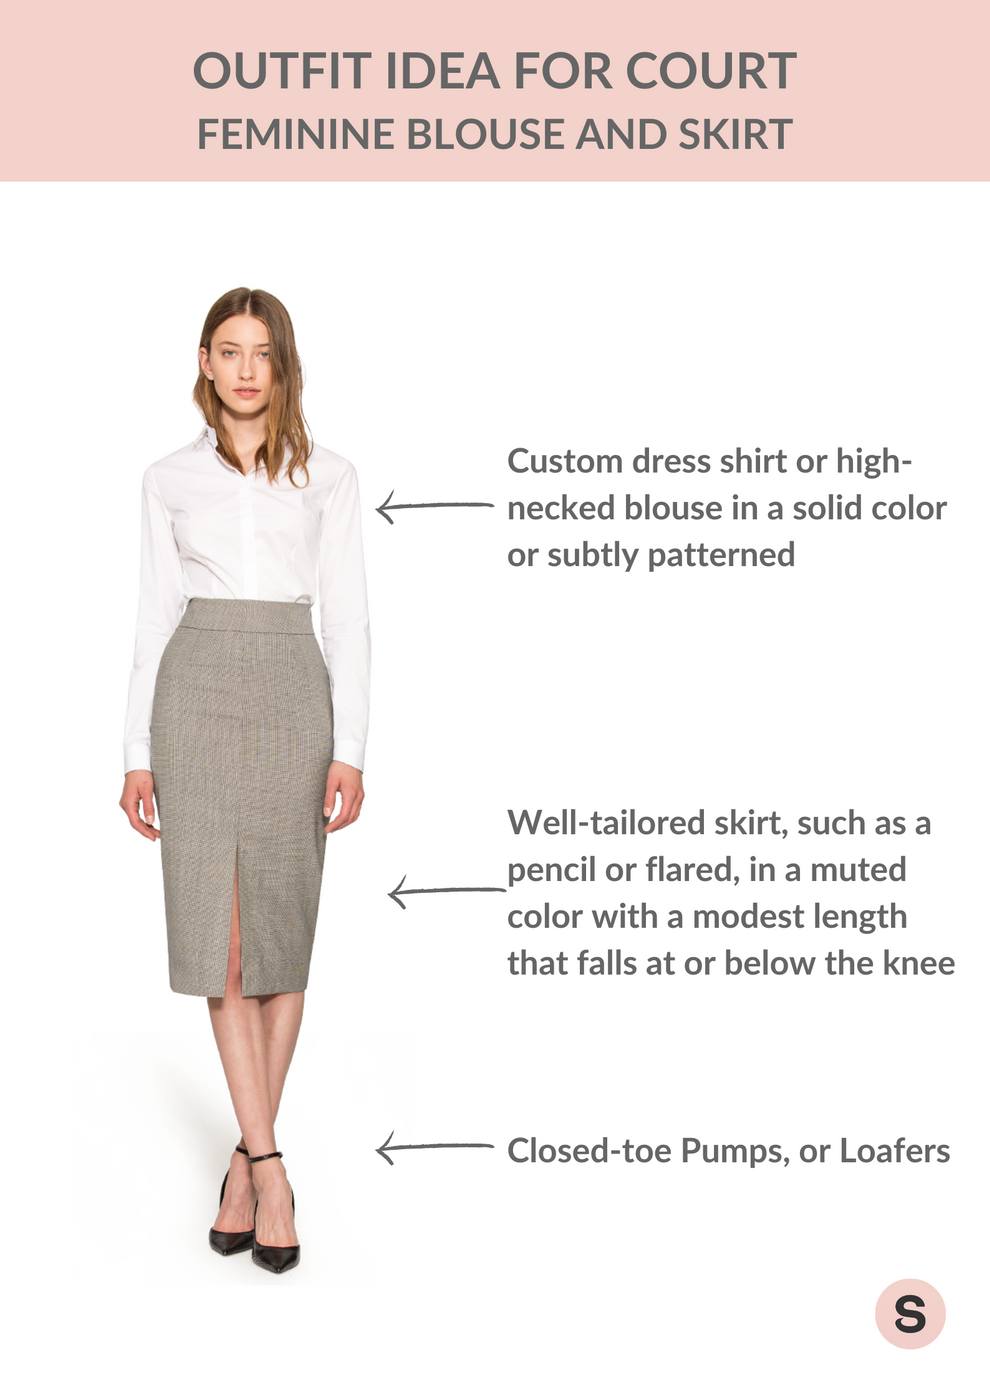 How to Dress for the Courtroom 